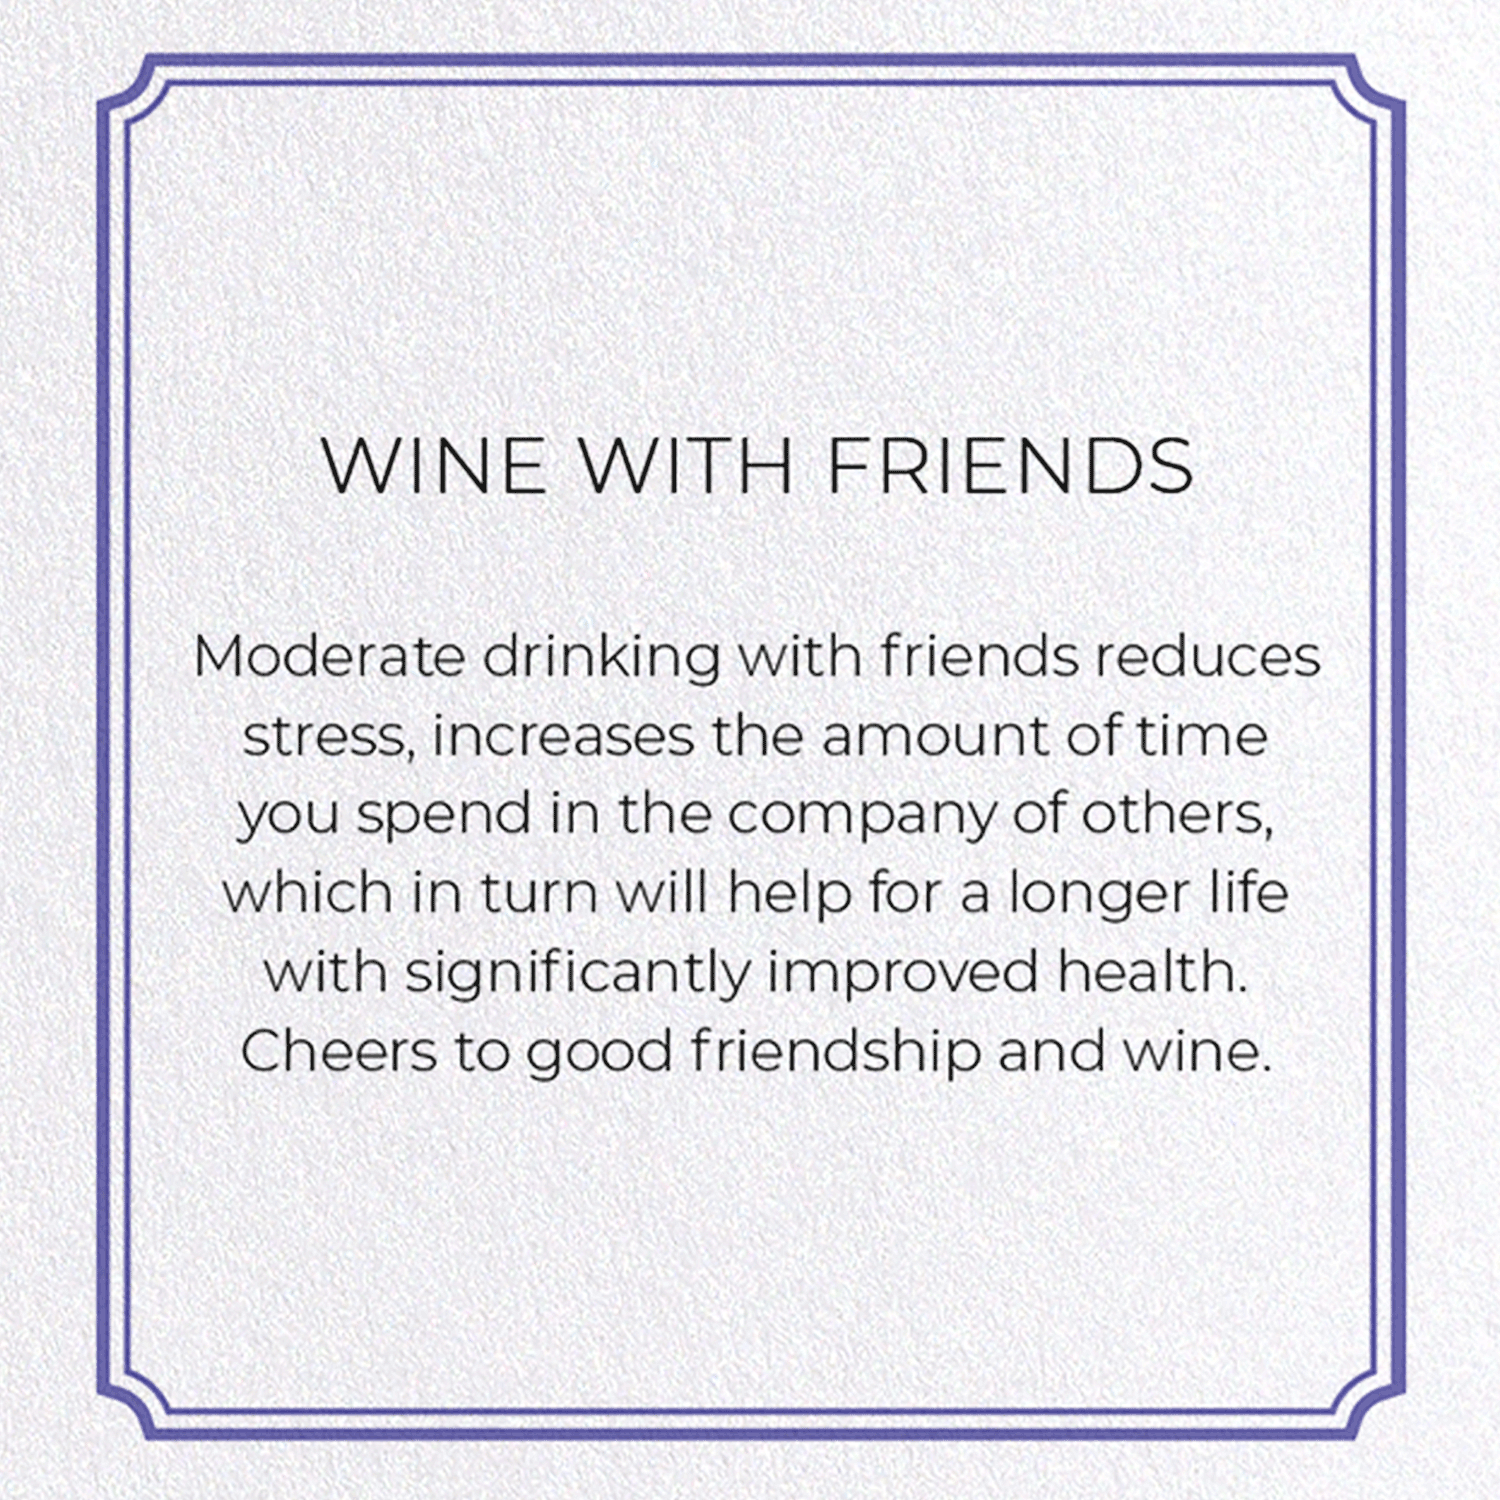 WINE WITH FRIENDS